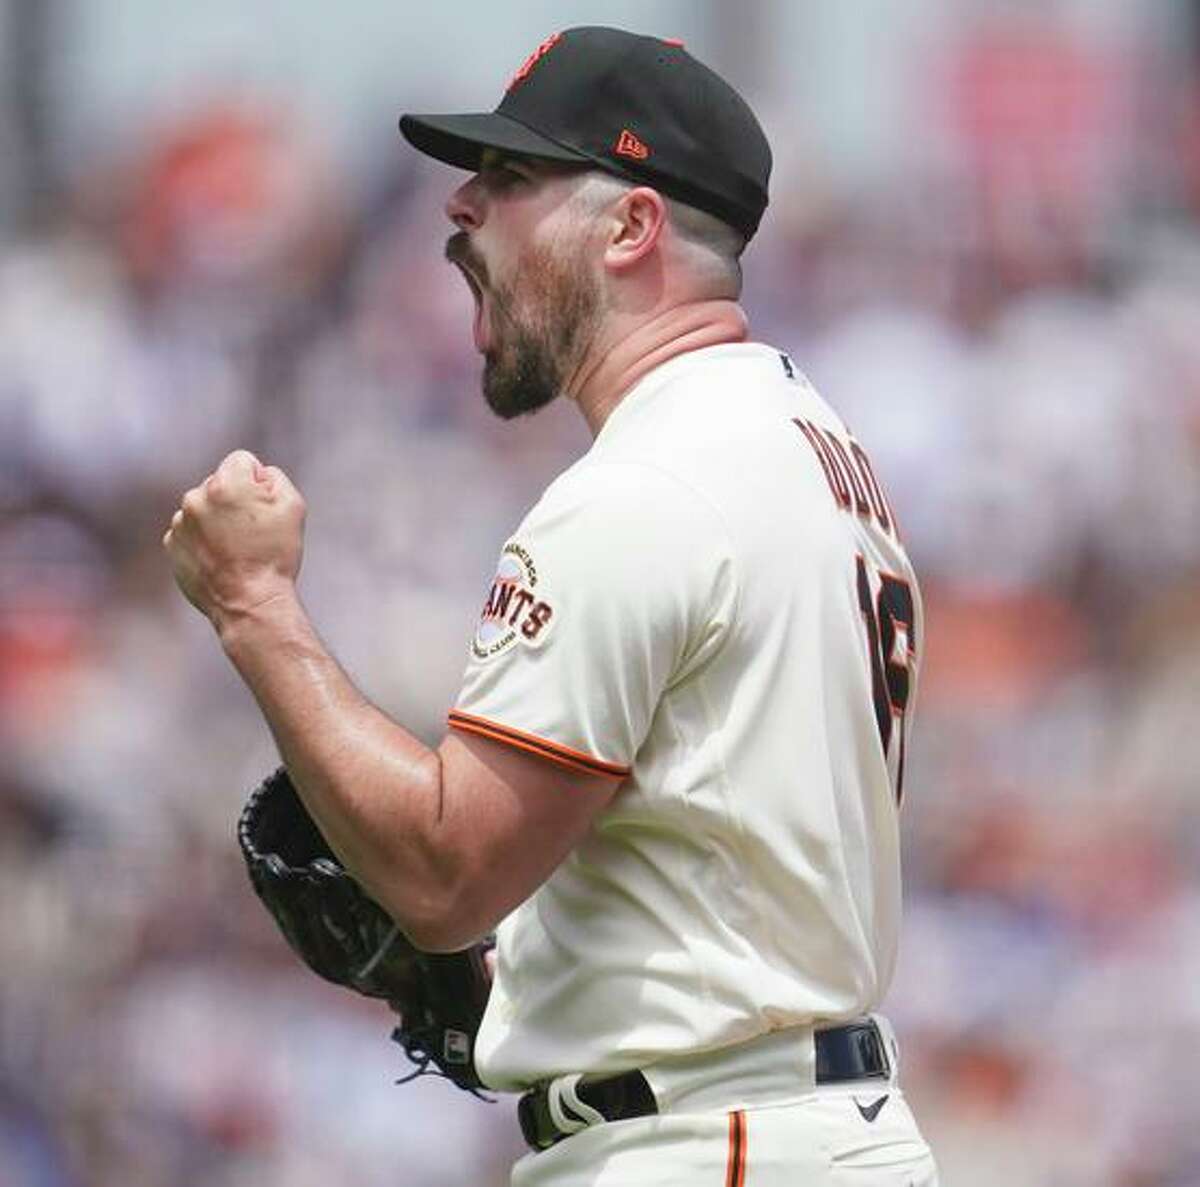 San Francisco Giants pitcher Carlos Rodon reacts after striking out Los Angeles Dodgers' Justin Turner during the fourth inning of a baseball game in San Francisco, Sunday, June 12, 2022. (AP Photo/Jeff Chiu)